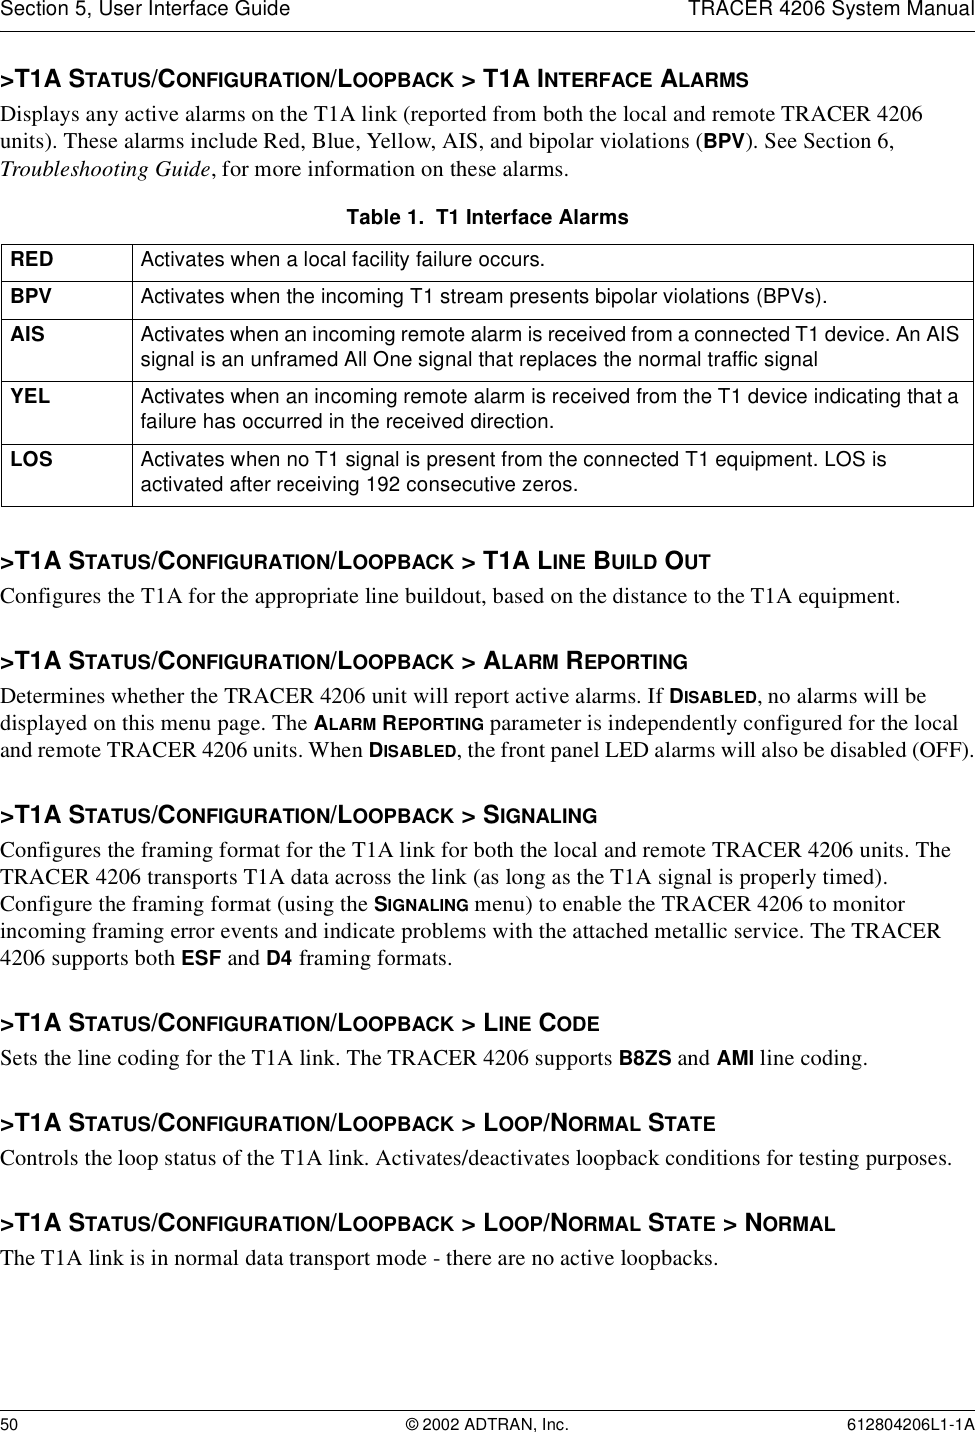 Section 5, User Interface Guide TRACER 4206 System Manual50 © 2002 ADTRAN, Inc. 612804206L1-1A&gt;T1A STATUS/CONFIGURATION/LOOPBACK &gt; T1A INTERFACE ALARMSDisplays any active alarms on the T1A link (reported from both the local and remote TRACER 4206 units). These alarms include Red, Blue, Yellow, AIS, and bipolar violations (BPV). See Section 6, Troubleshooting Guide, for more information on these alarms.&gt;T1A STATUS/CONFIGURATION/LOOPBACK &gt; T1A LINE BUILD OUTConfigures the T1A for the appropriate line buildout, based on the distance to the T1A equipment. &gt;T1A STATUS/CONFIGURATION/LOOPBACK &gt; ALARM REPORTINGDetermines whether the TRACER 4206 unit will report active alarms. If DISABLED, no alarms will be displayed on this menu page. The ALARM REPORTING parameter is independently configured for the local and remote TRACER 4206 units. When DISABLED, the front panel LED alarms will also be disabled (OFF).&gt;T1A STATUS/CONFIGURATION/LOOPBACK &gt; SIGNALINGConfigures the framing format for the T1A link for both the local and remote TRACER 4206 units. The TRACER 4206 transports T1A data across the link (as long as the T1A signal is properly timed). Configure the framing format (using the SIGNALING menu) to enable the TRACER 4206 to monitor incoming framing error events and indicate problems with the attached metallic service. The TRACER 4206 supports both ESF and D4 framing formats.&gt;T1A STATUS/CONFIGURATION/LOOPBACK &gt; LINE CODESets the line coding for the T1A link. The TRACER 4206 supports B8ZS and AMI line coding.&gt;T1A STATUS/CONFIGURATION/LOOPBACK &gt; LOOP/NORMAL STATEControls the loop status of the T1A link. Activates/deactivates loopback conditions for testing purposes.&gt;T1A STATUS/CONFIGURATION/LOOPBACK &gt; LOOP/NORMAL STATE &gt; NORMALThe T1A link is in normal data transport mode - there are no active loopbacks.Table 1.  T1 Interface AlarmsRED Activates when a local facility failure occurs.BPV Activates when the incoming T1 stream presents bipolar violations (BPVs).AIS Activates when an incoming remote alarm is received from a connected T1 device. An AIS signal is an unframed All One signal that replaces the normal traffic signalYEL Activates when an incoming remote alarm is received from the T1 device indicating that a failure has occurred in the received direction.LOS Activates when no T1 signal is present from the connected T1 equipment. LOS is activated after receiving 192 consecutive zeros.